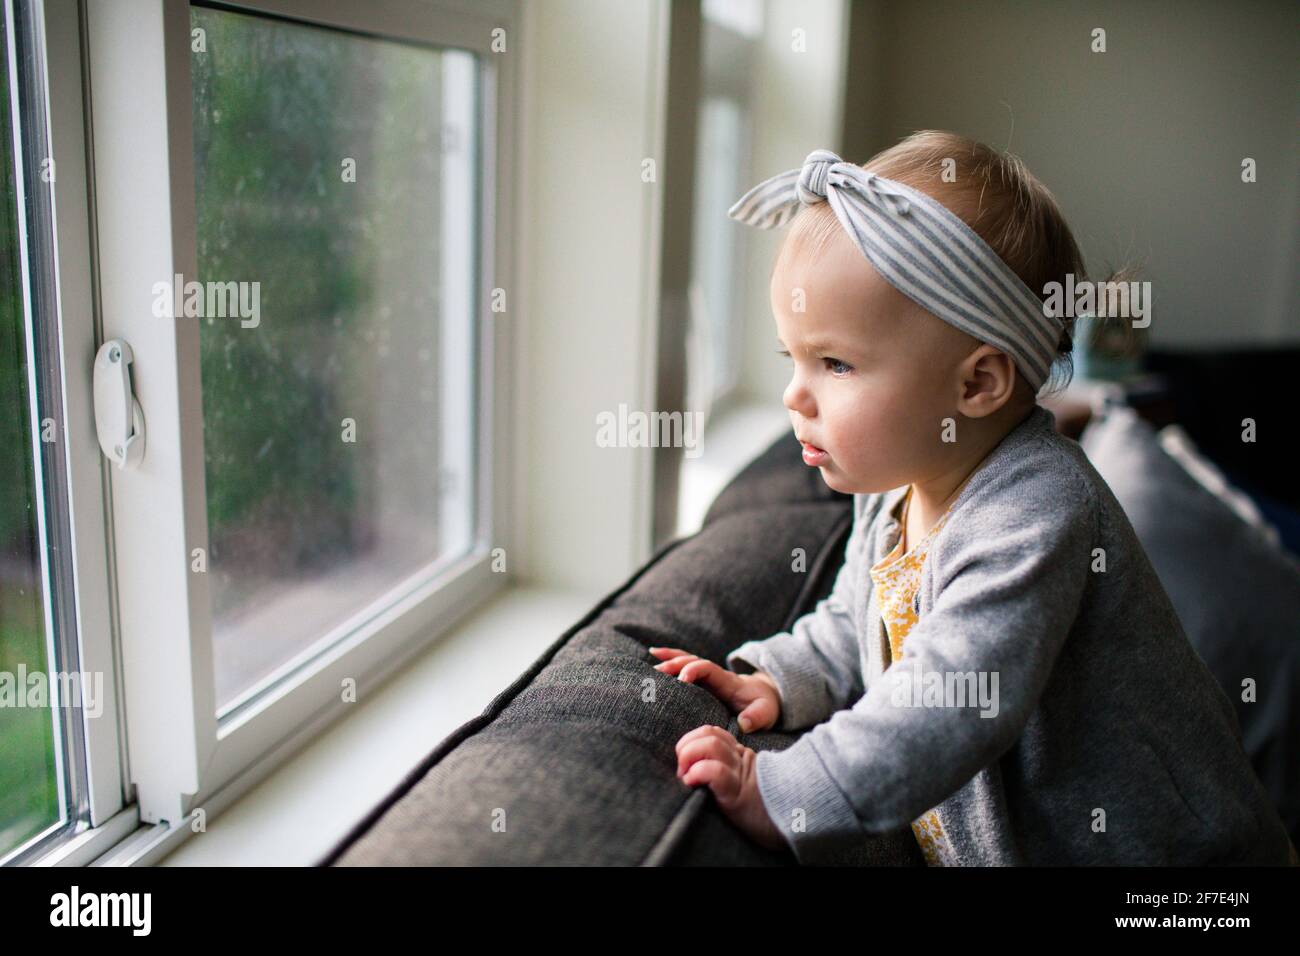 Pretty young girl looking out window from inside her home. Stock Photo